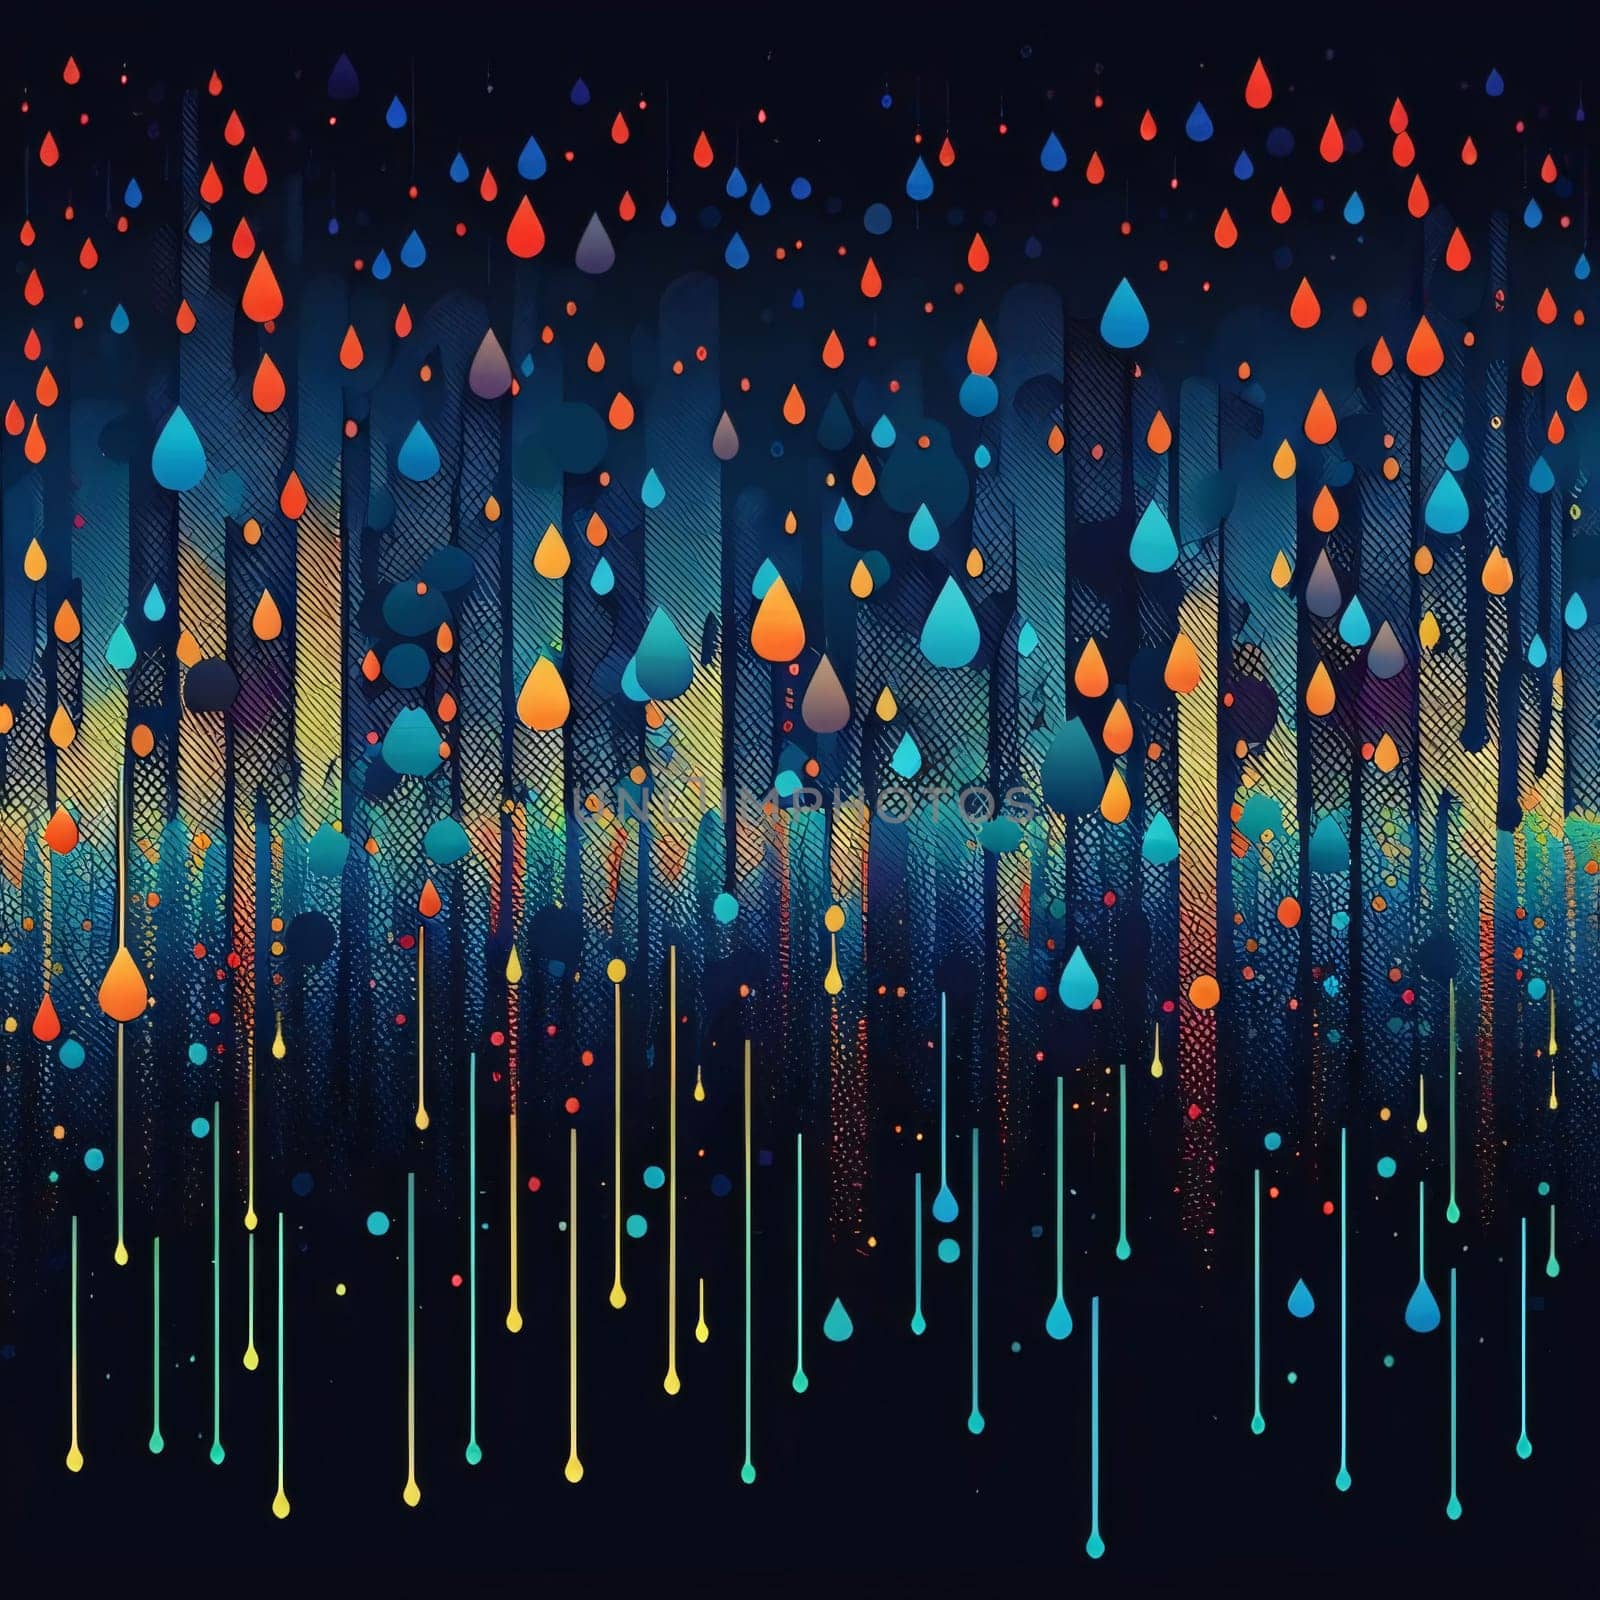 Abstract background design: abstract background with colorful drops and waves, vector illustration eps10